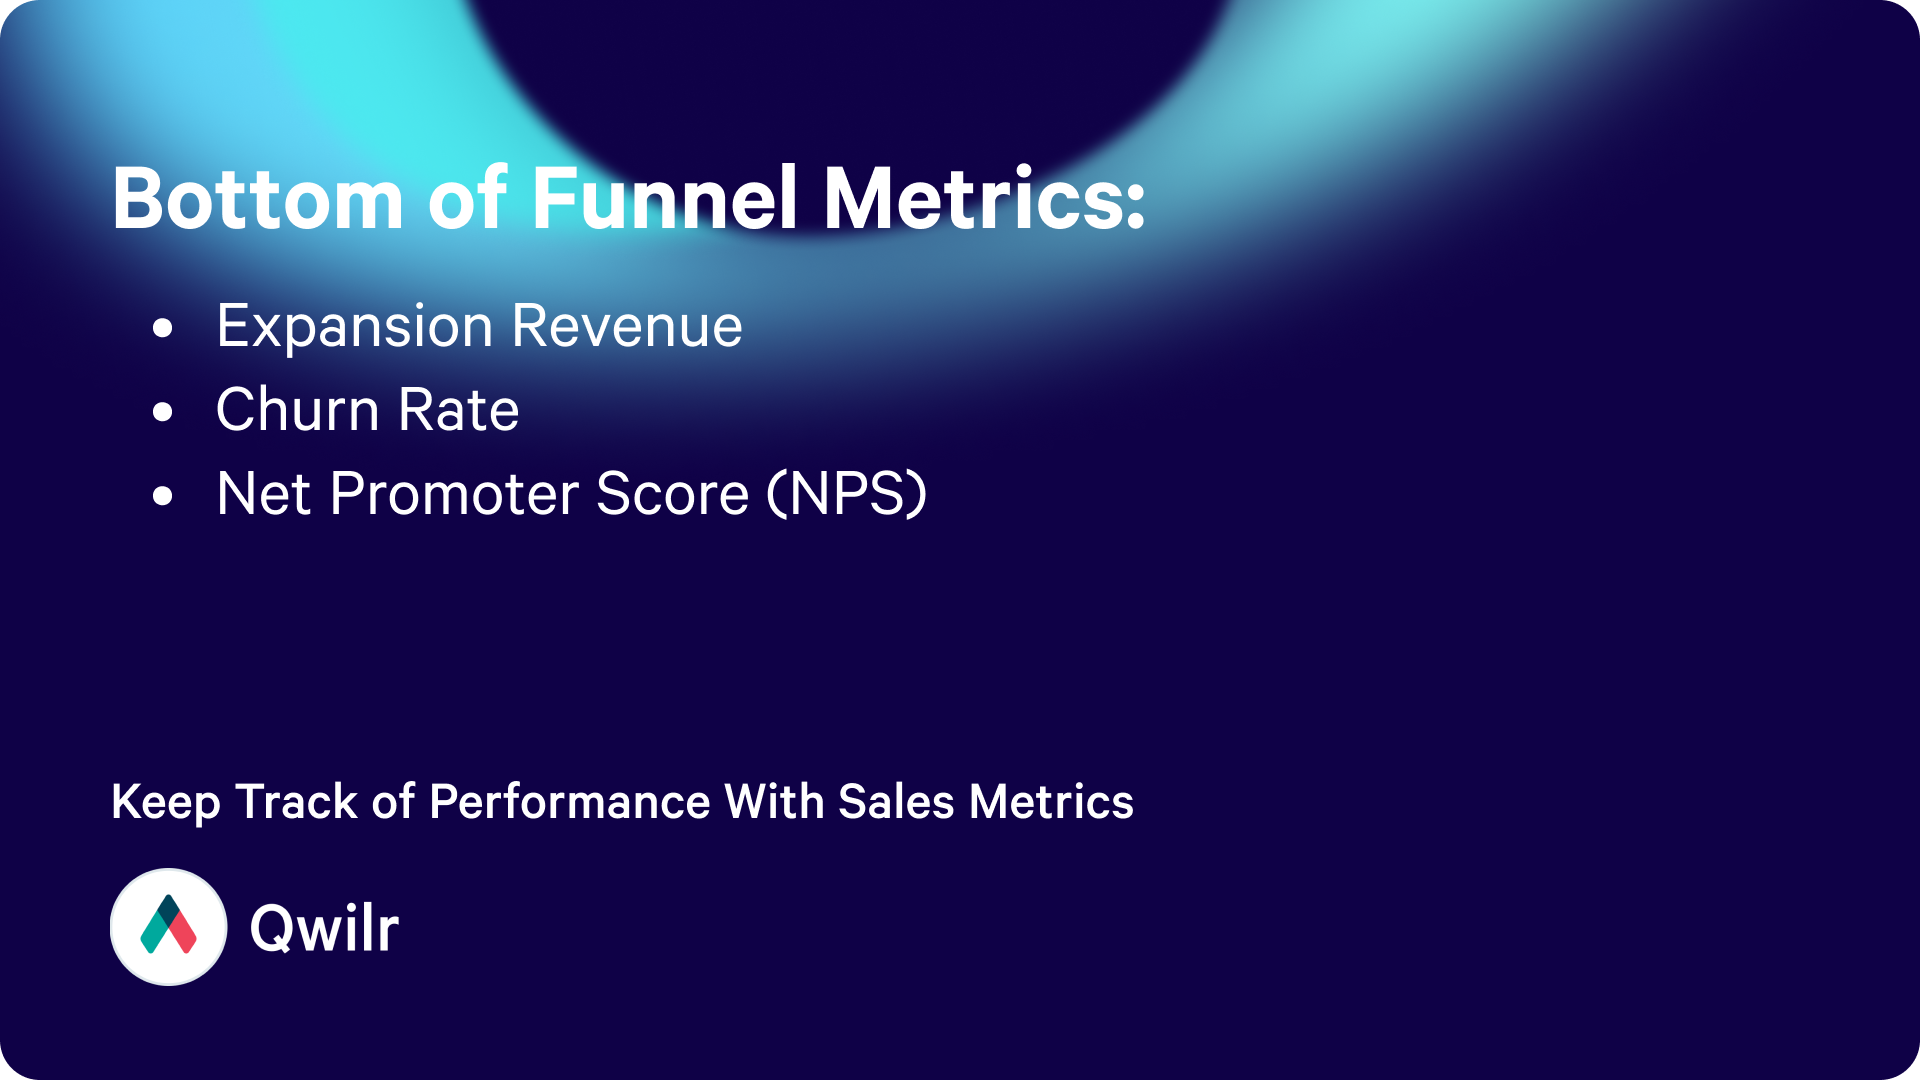 Key bottom of funnel sales metrics are: expansion revenue, churn rate and NPS